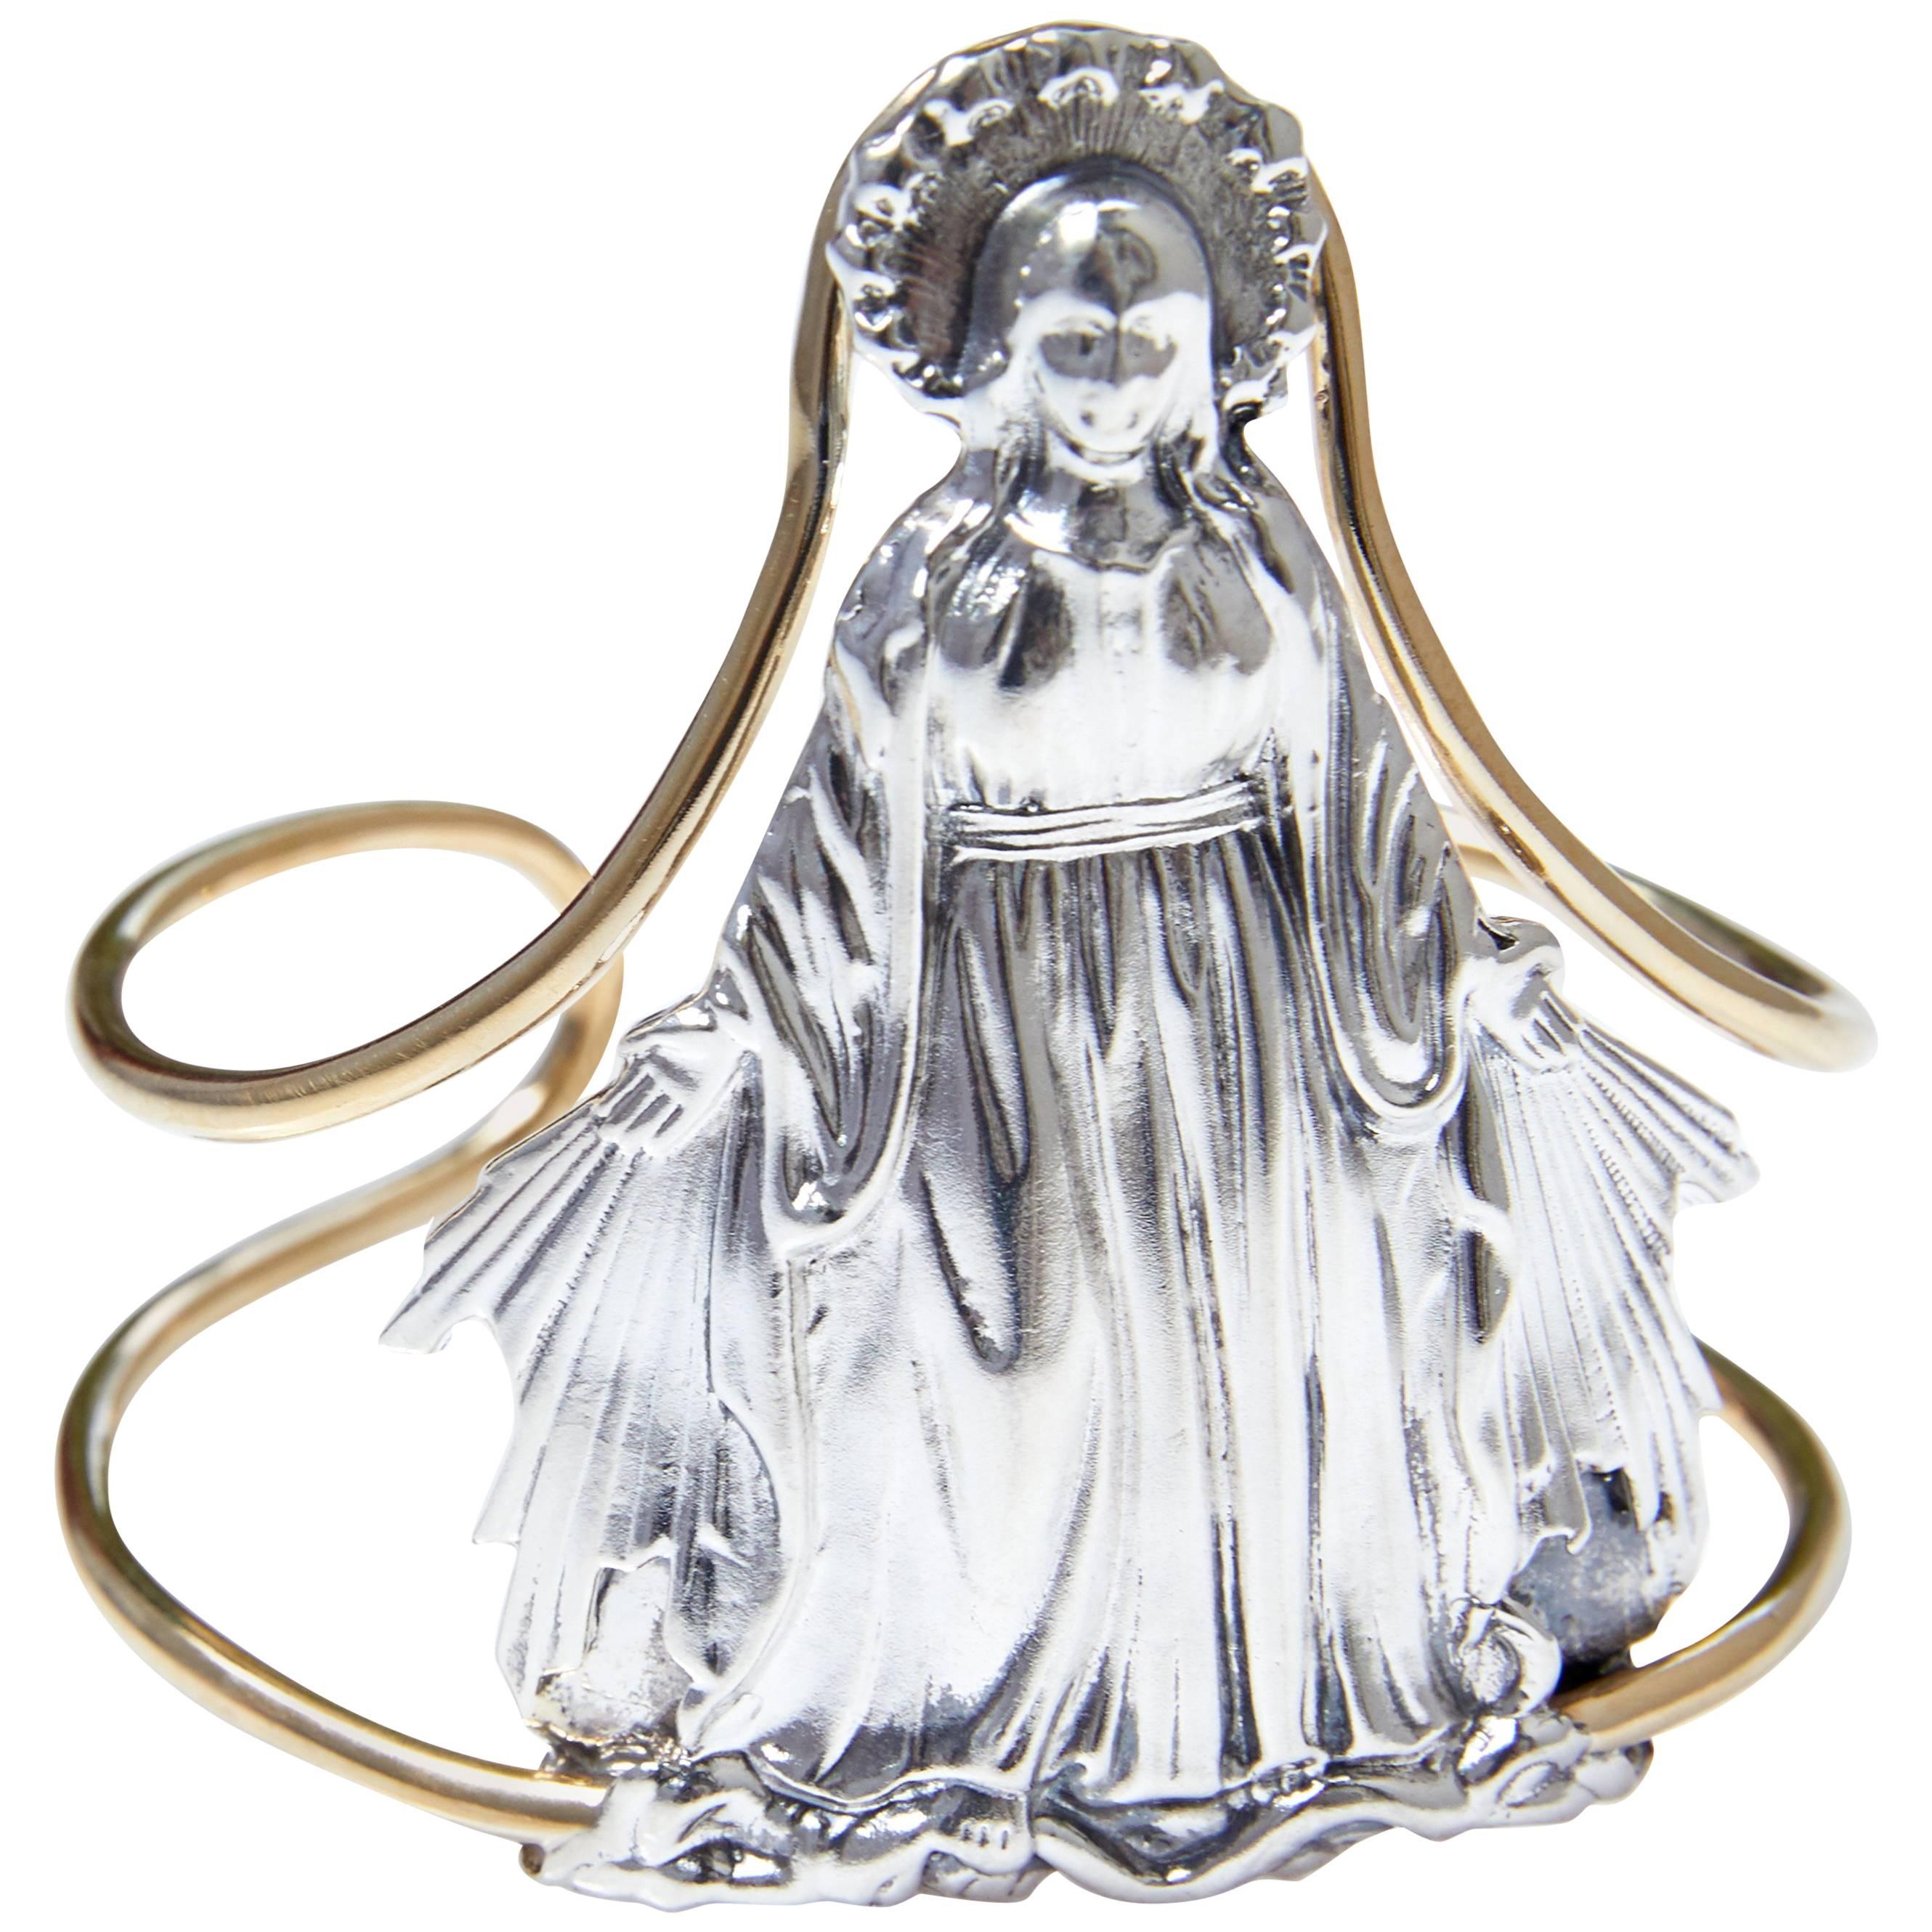 Virgin Mary Mother Mary Cuff Bangle Bracelet Statement Silver Brass J Dauphin For Sale